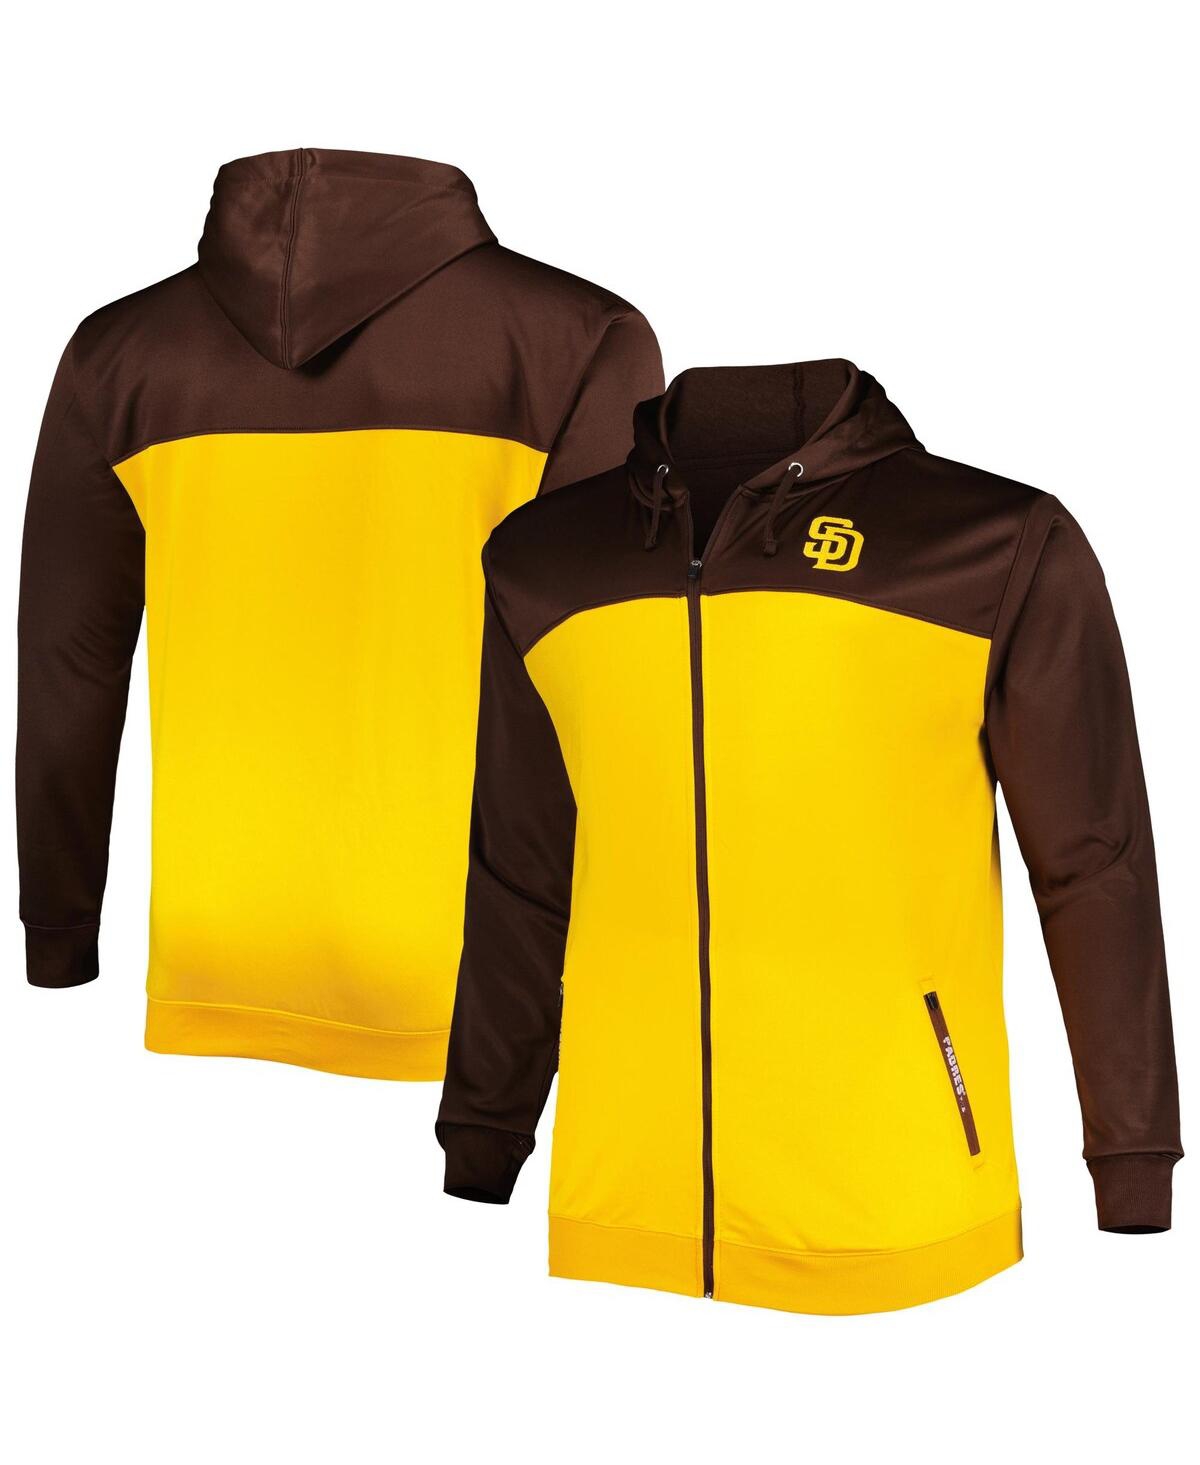 Men's Brown and Gold San Diego Padres Big and Tall Yoke Full-Zip Hoodie - Brown, Gold